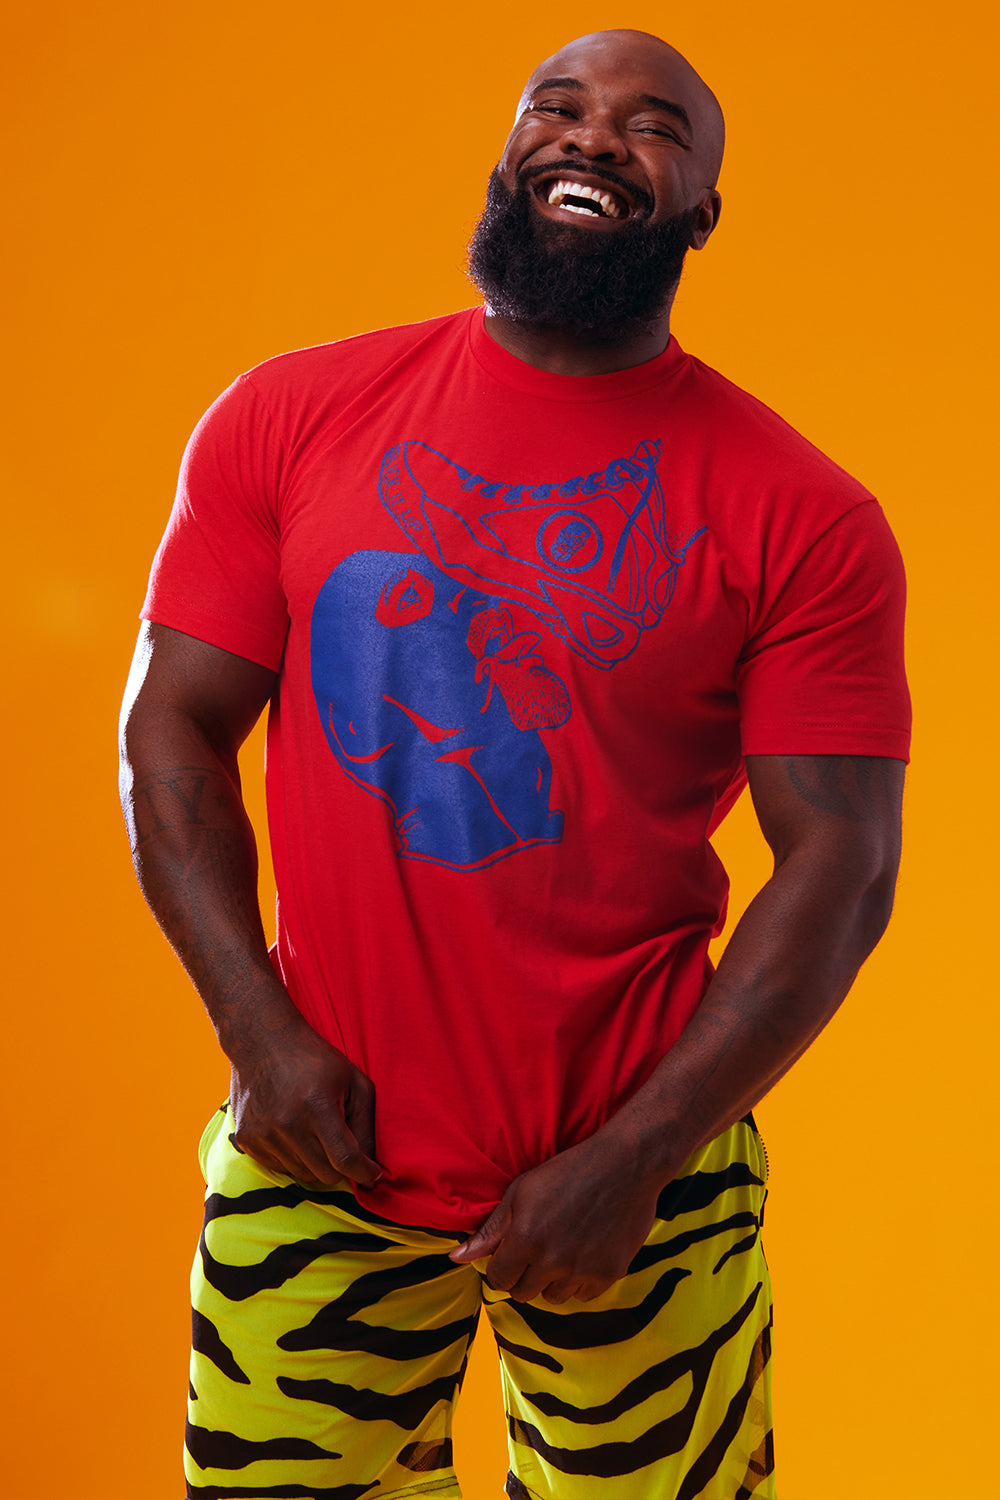 Sneaker Stomp Tee Shirt (Red and Blue) - Slick It Up 